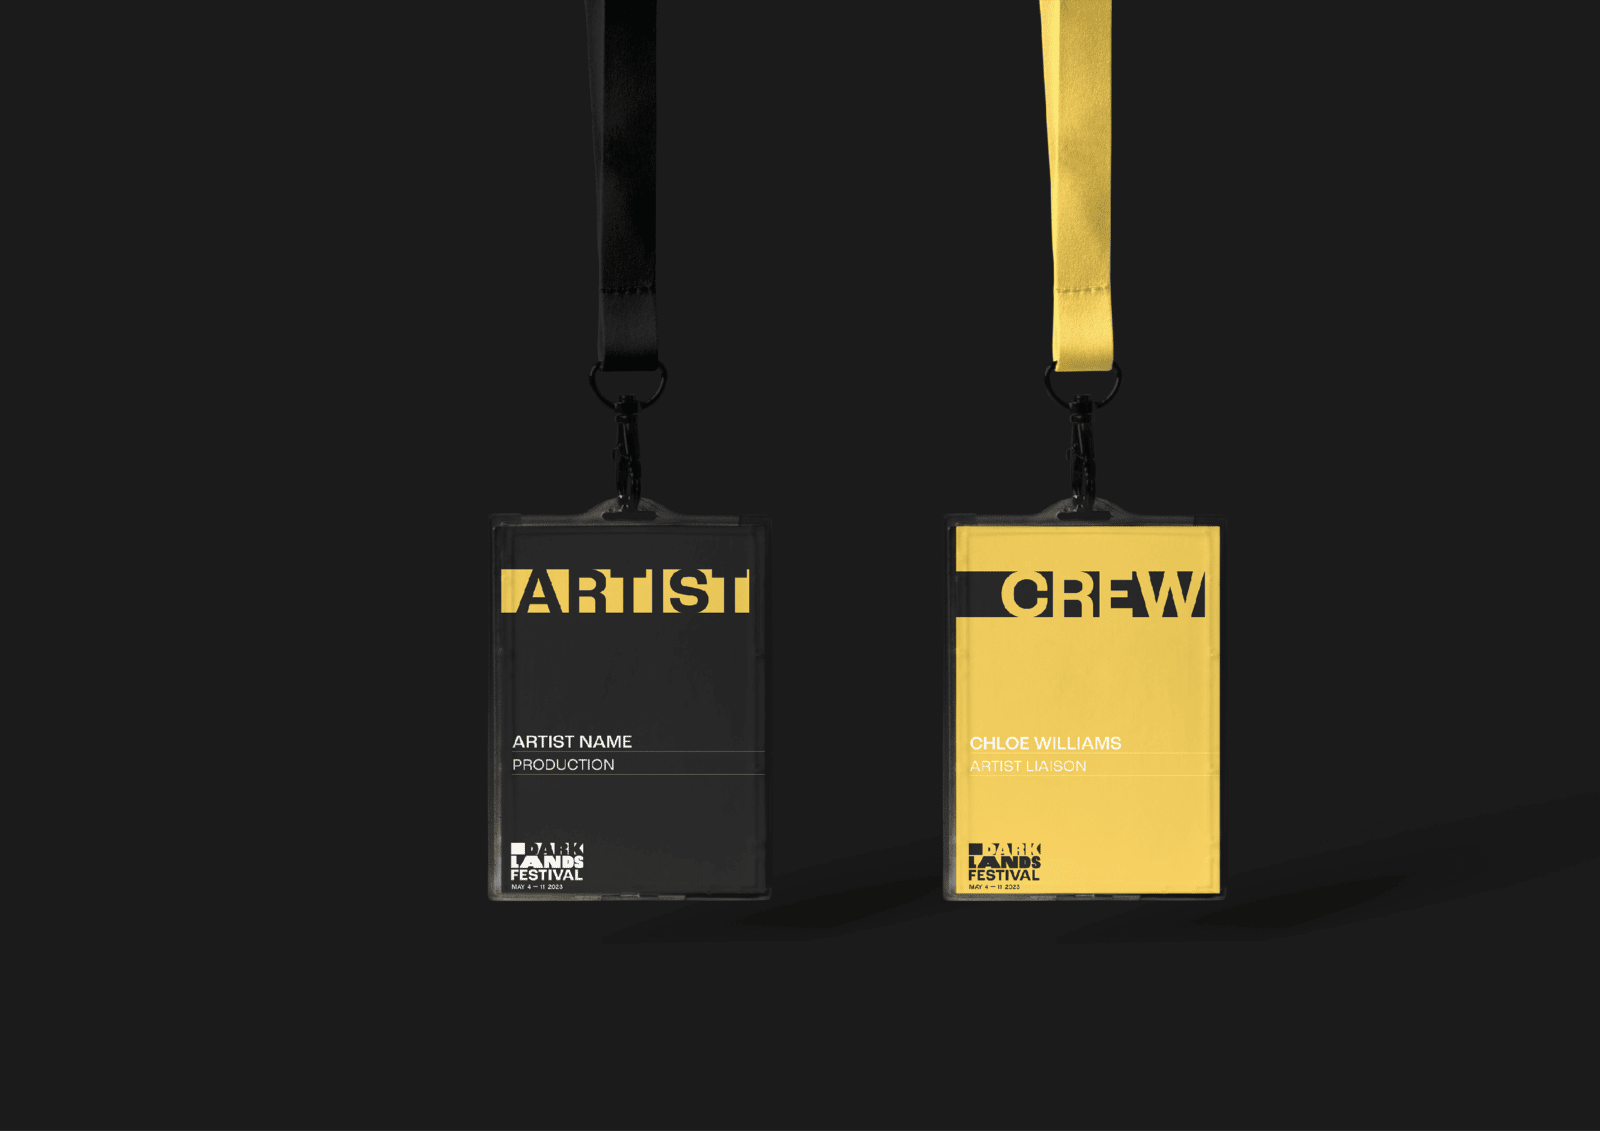 Festival lanyards for artist and crew.